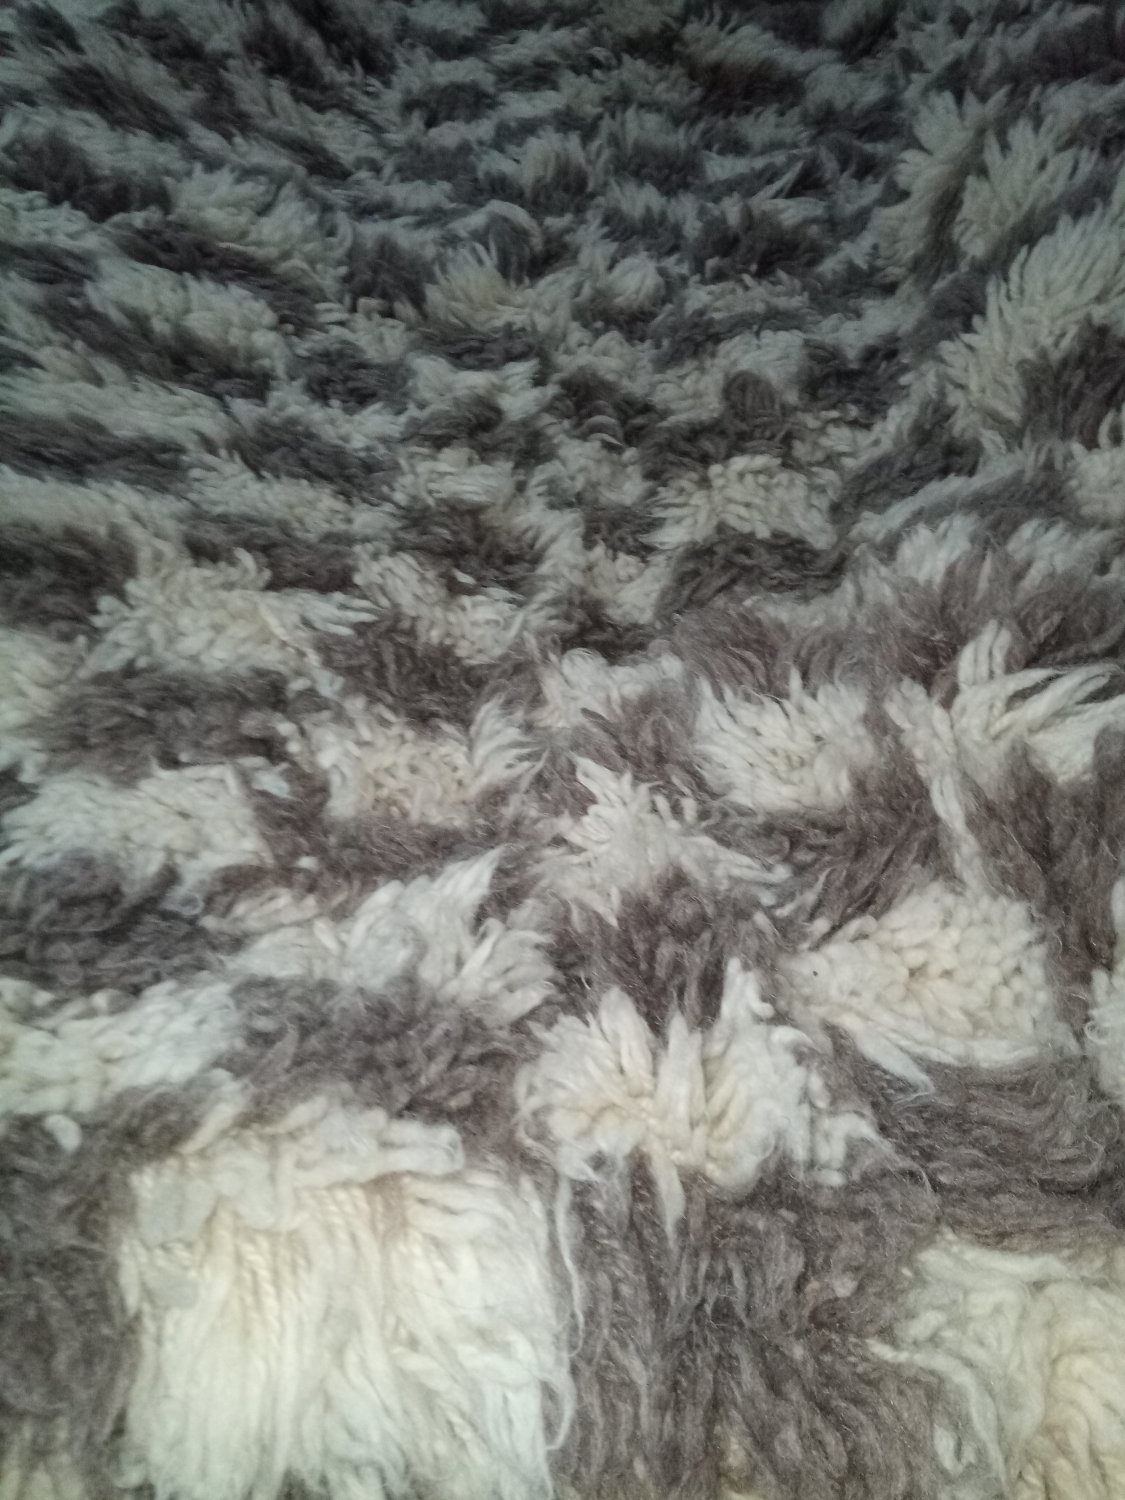 Rug Orient Handwoven 100%Wool with fluffy long fringes with black and white squares